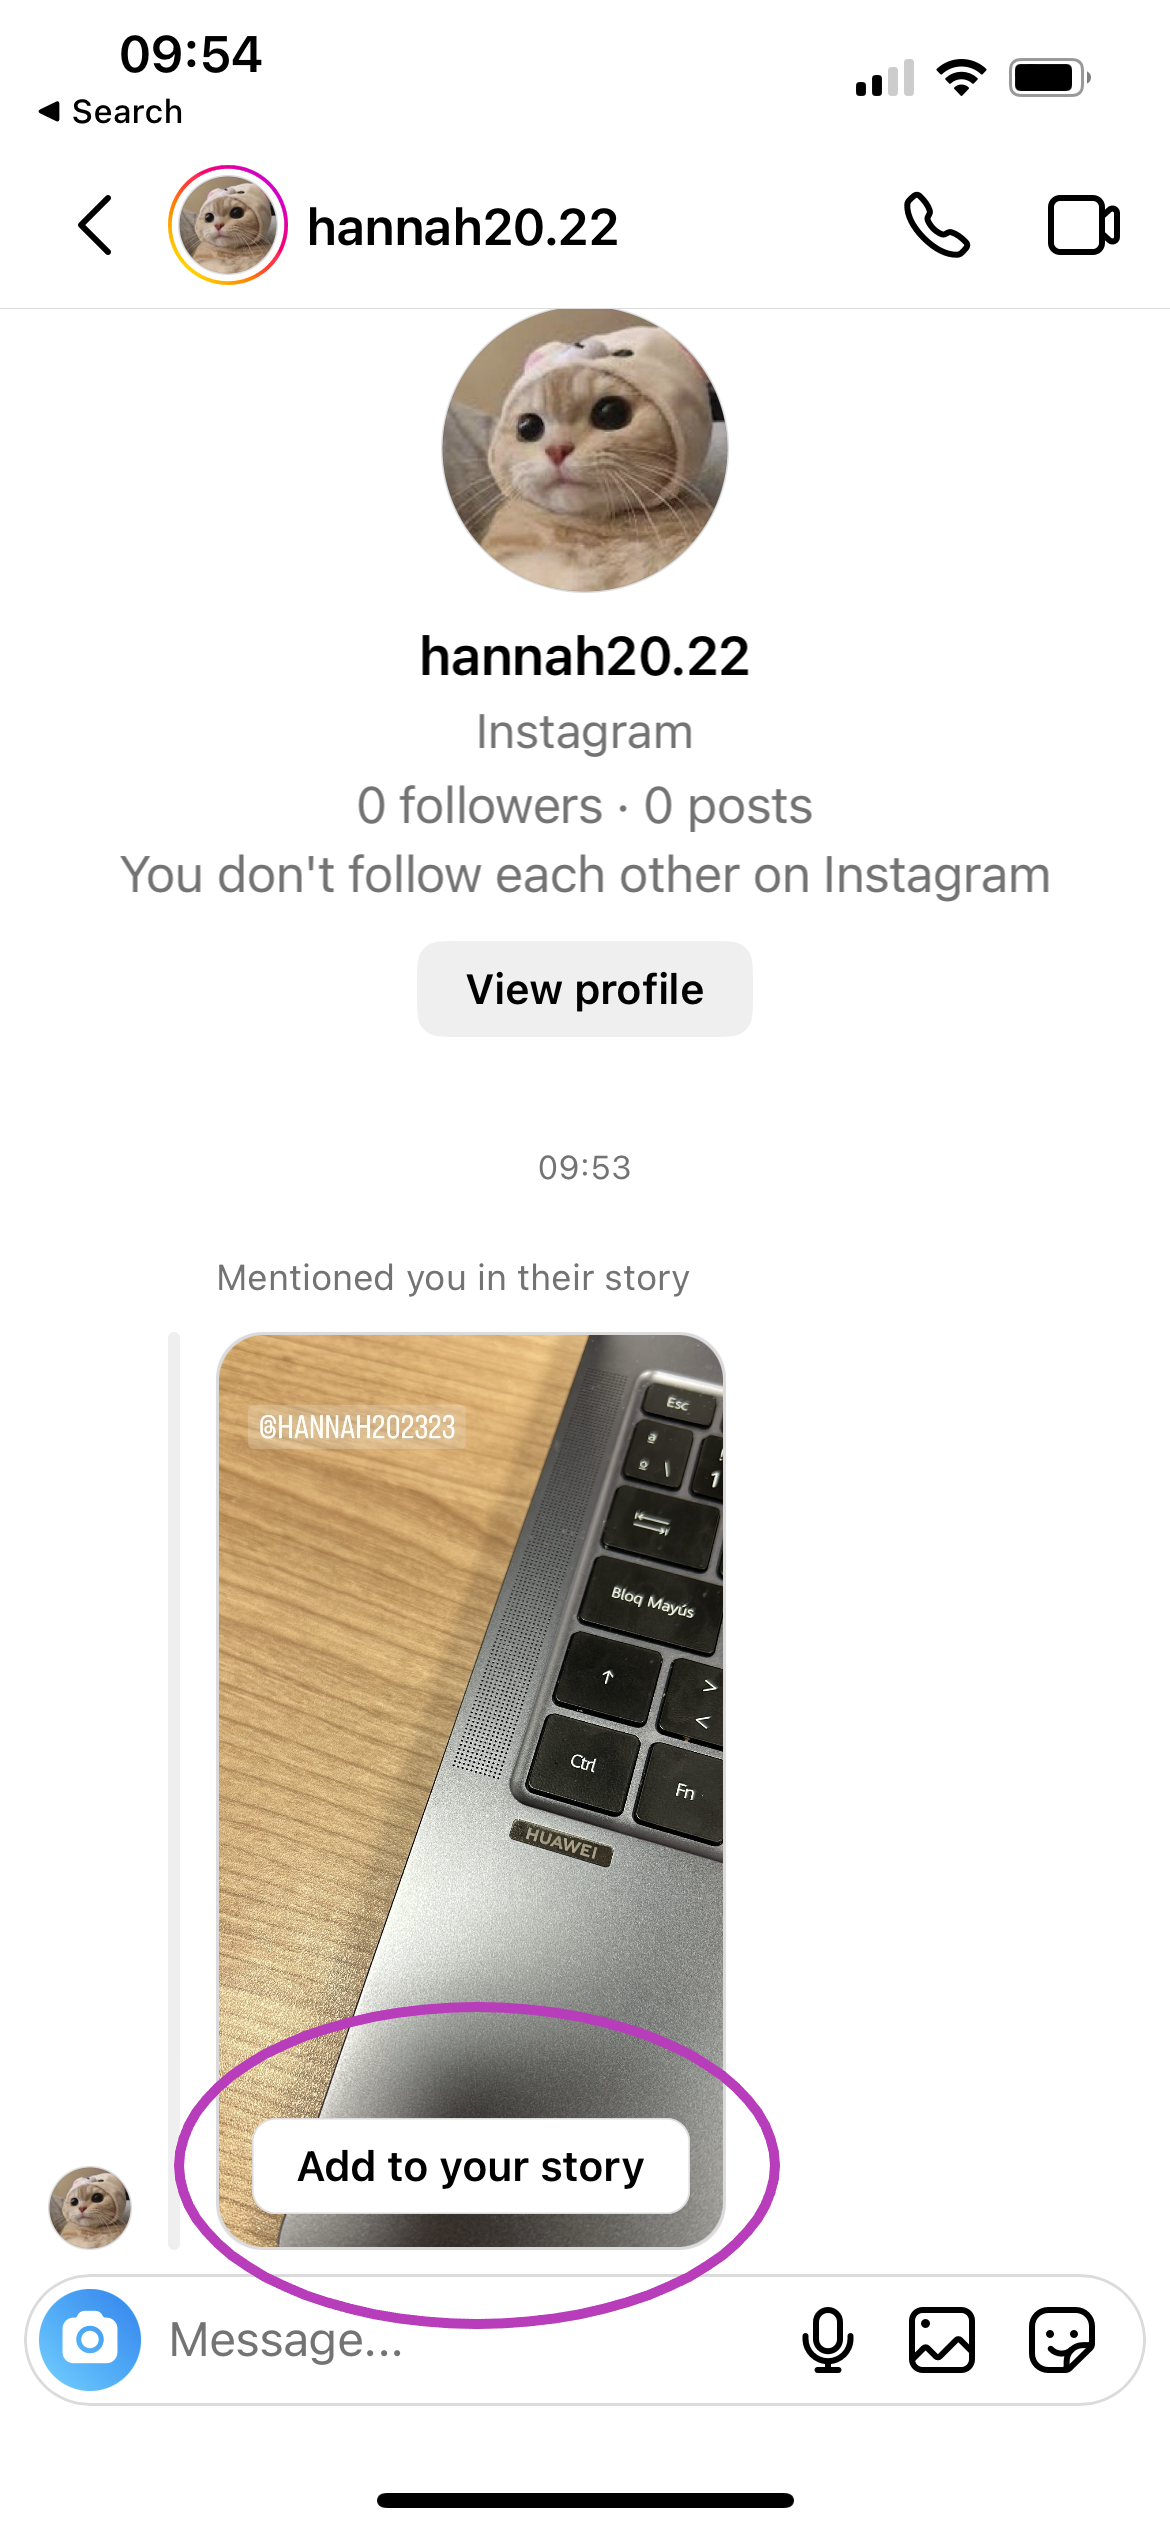 How to repost a story on Instagram